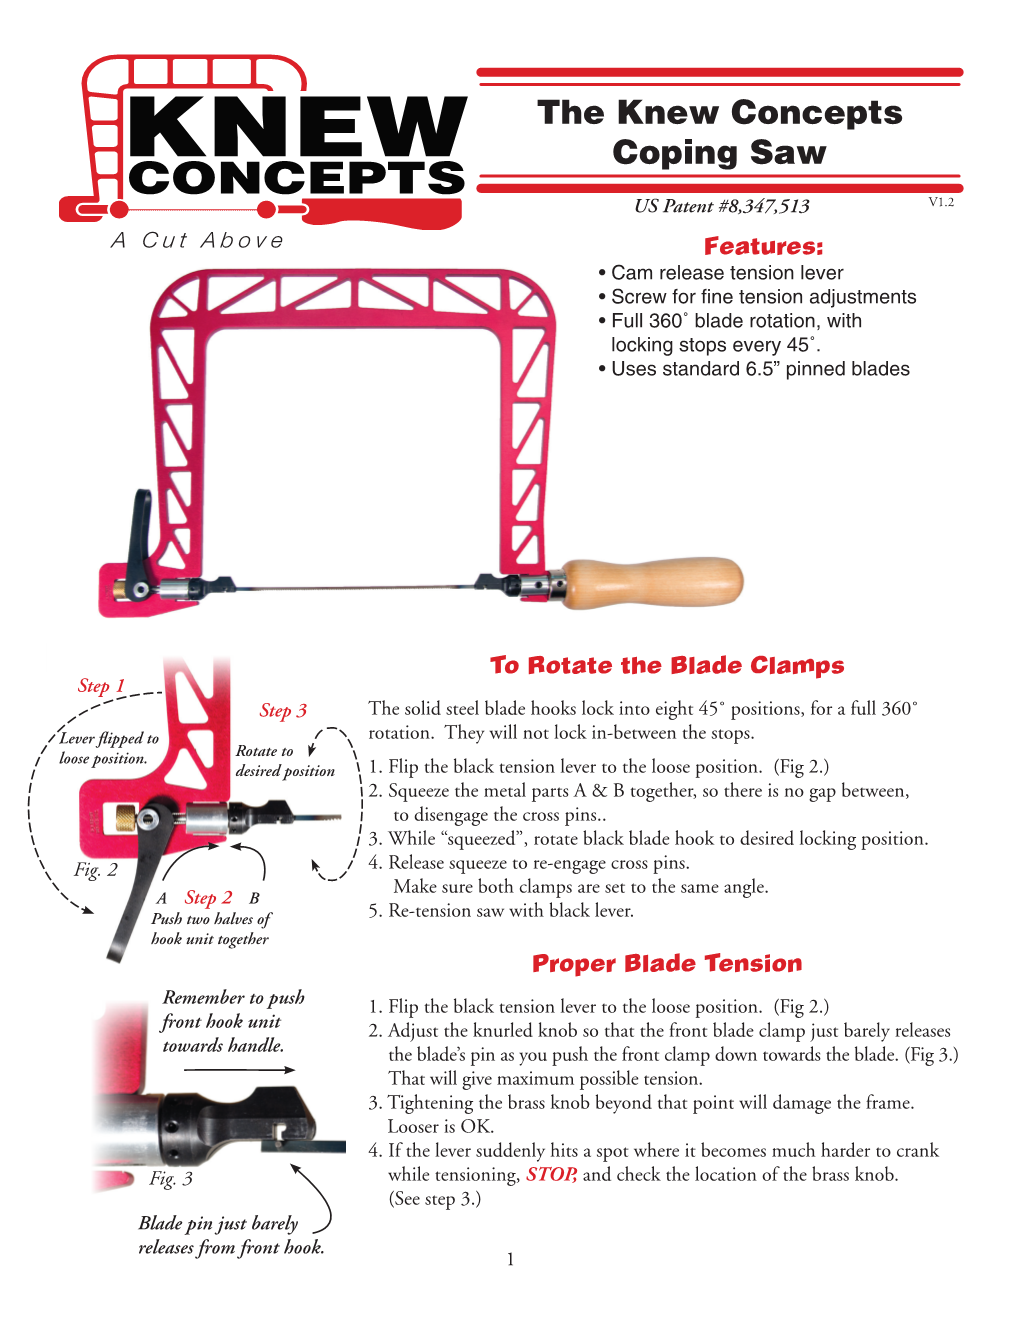 The Knew Concepts Coping Saw